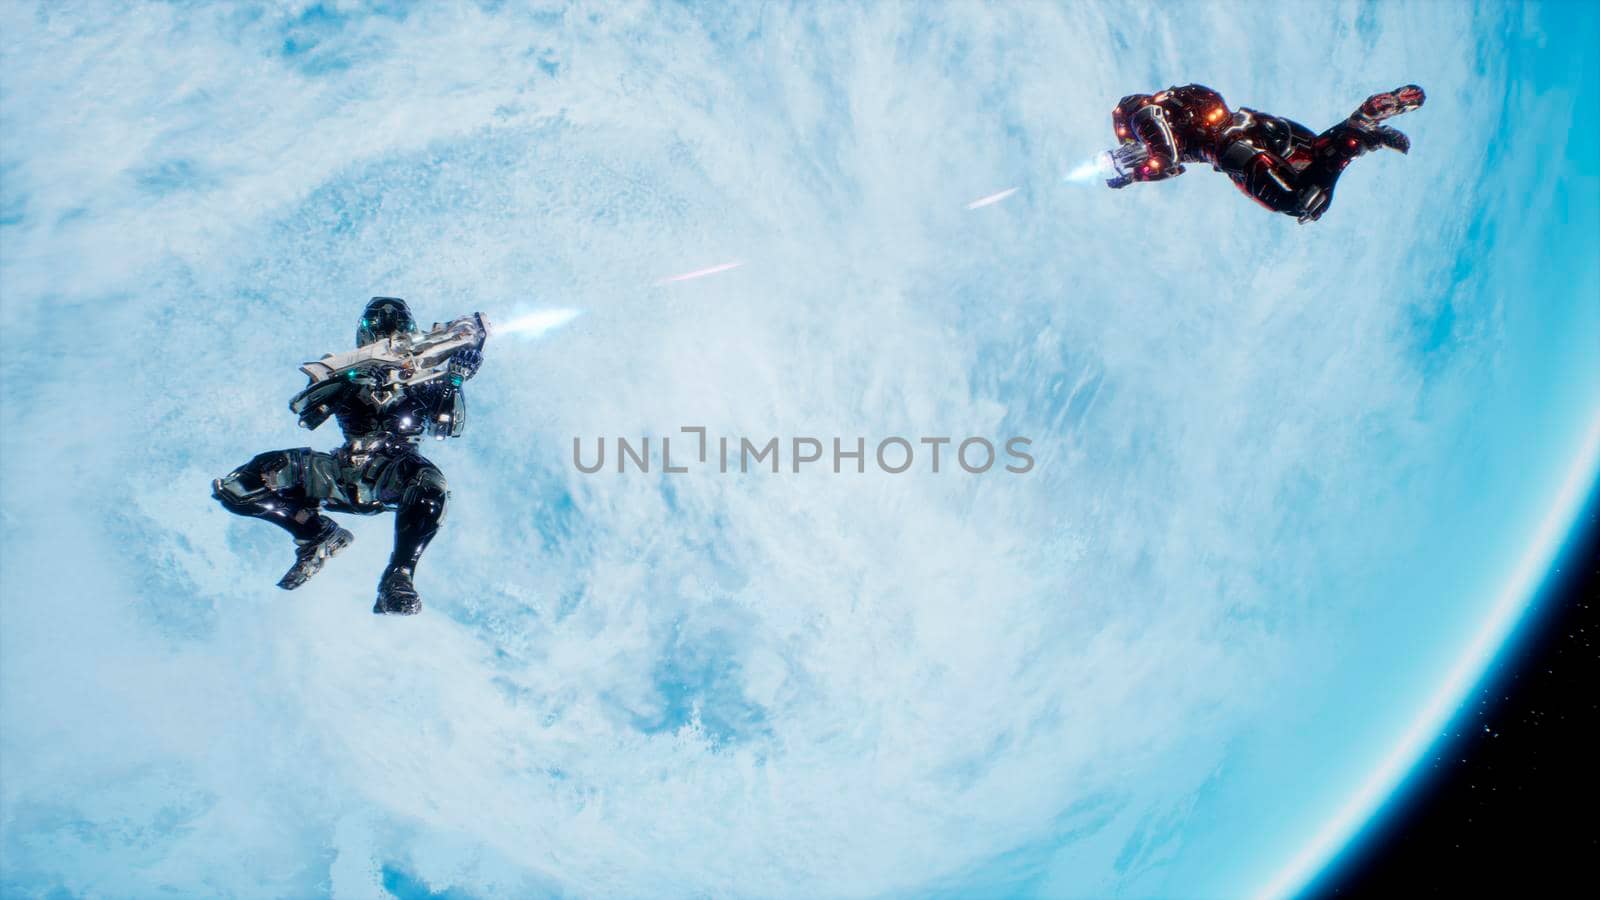 Battle of soldiers of the future in open space near the blue planet. Shootout in deep space.